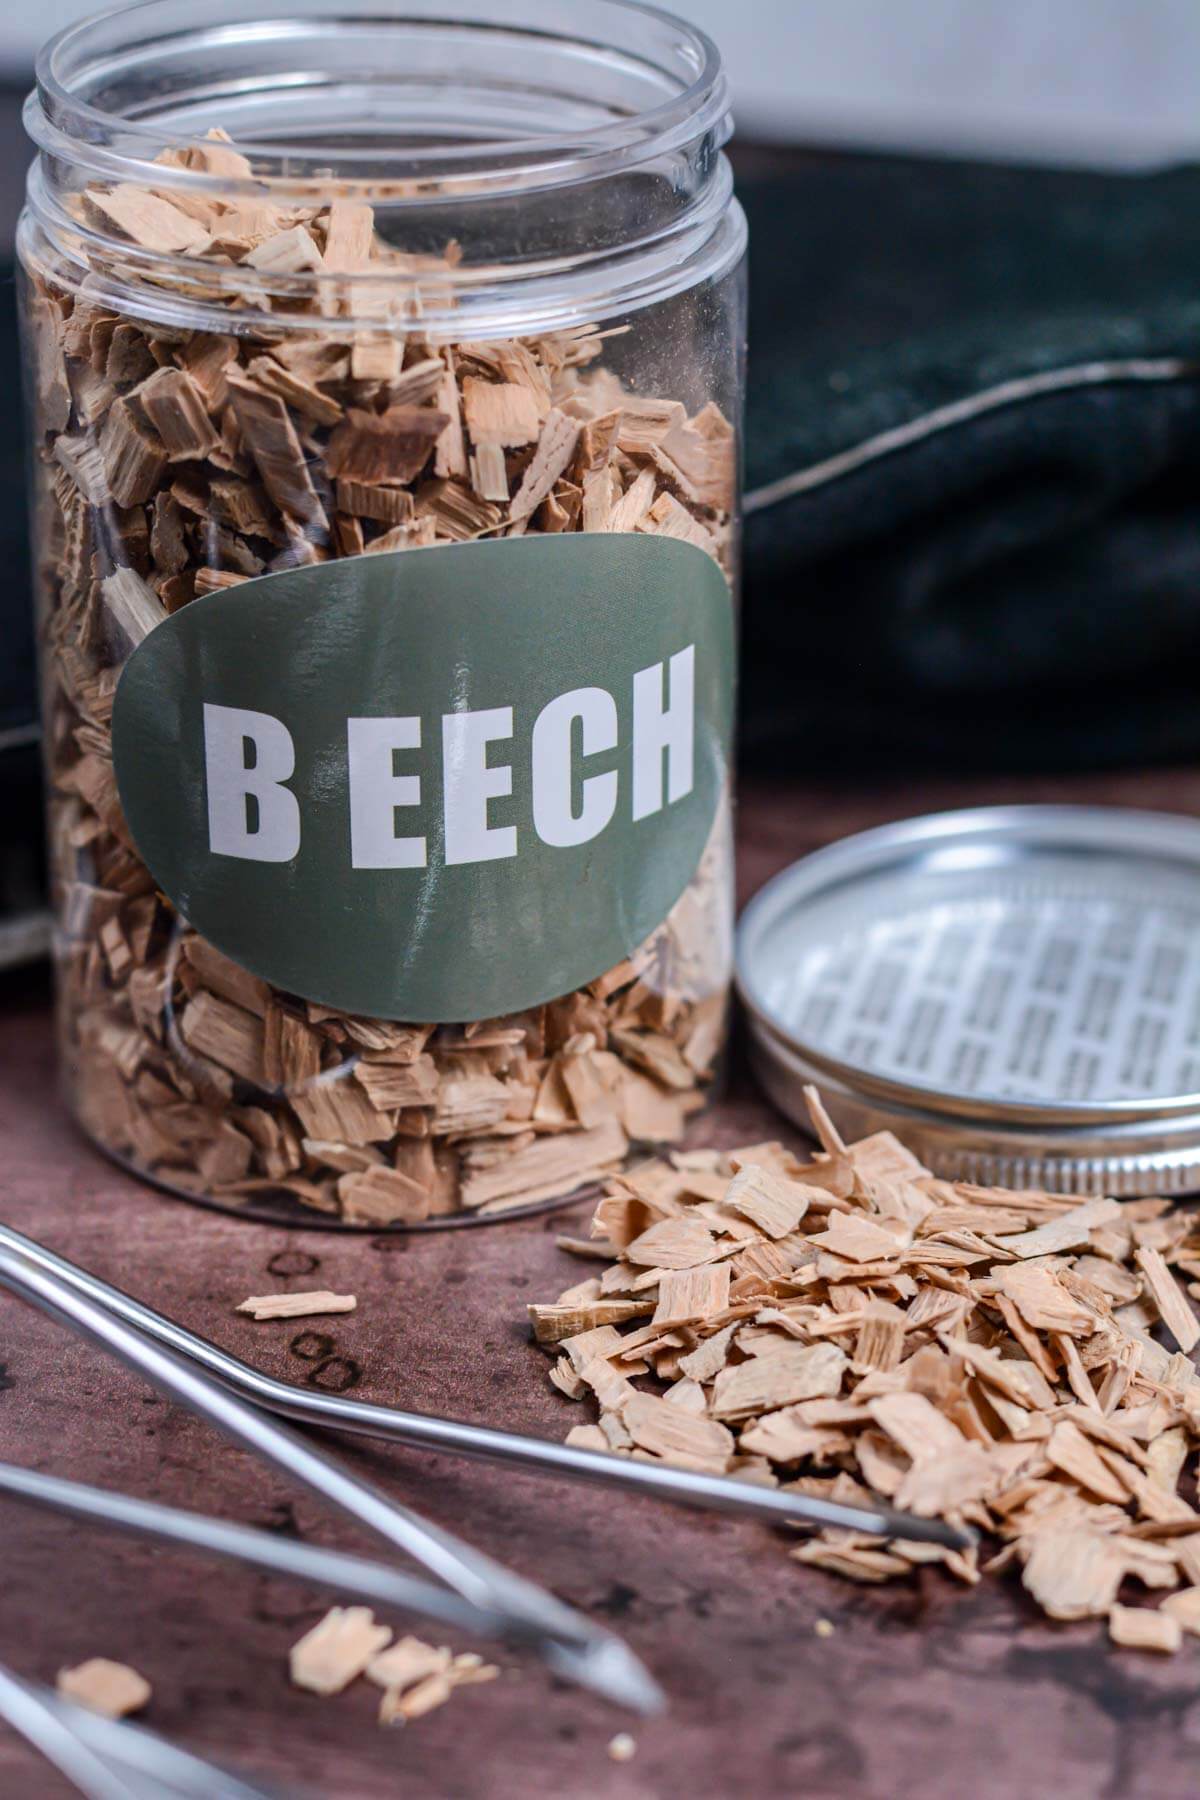 jar of beech wood ships with grilling tools on the table.